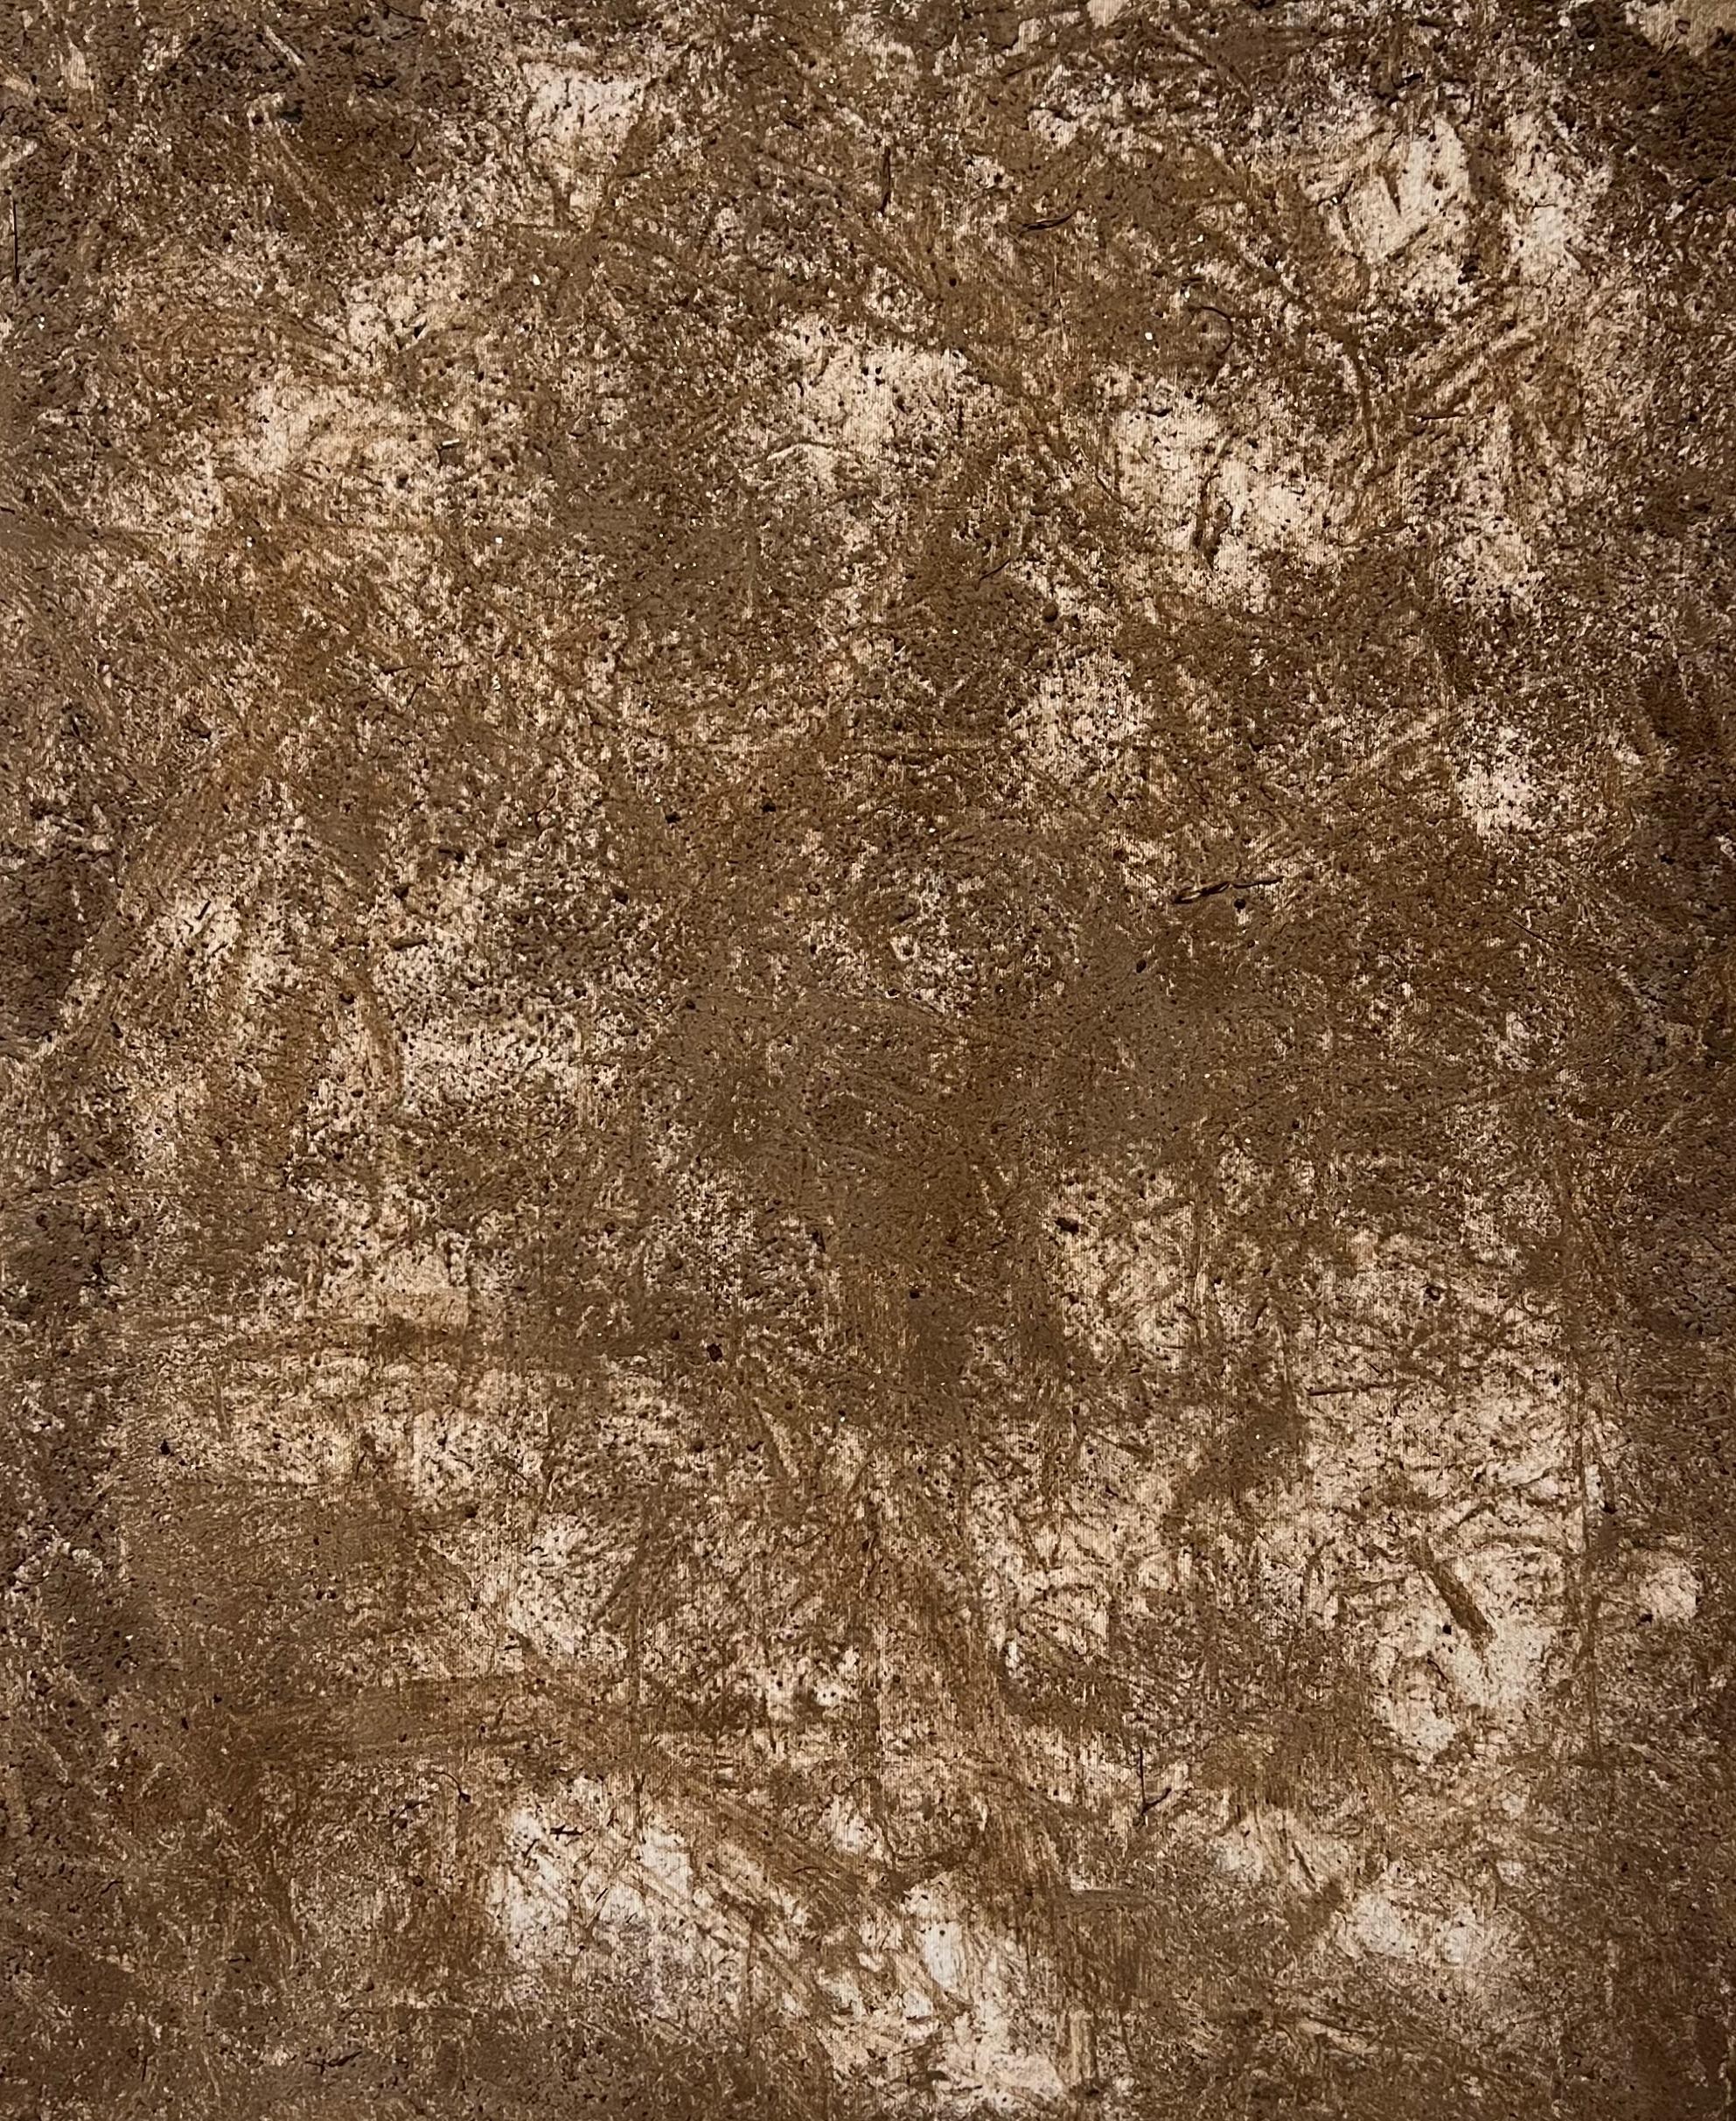 TUSET Landscape Painting - Art Povera painting, Land art, Cotton canvas and pine wood, Original, Brown.